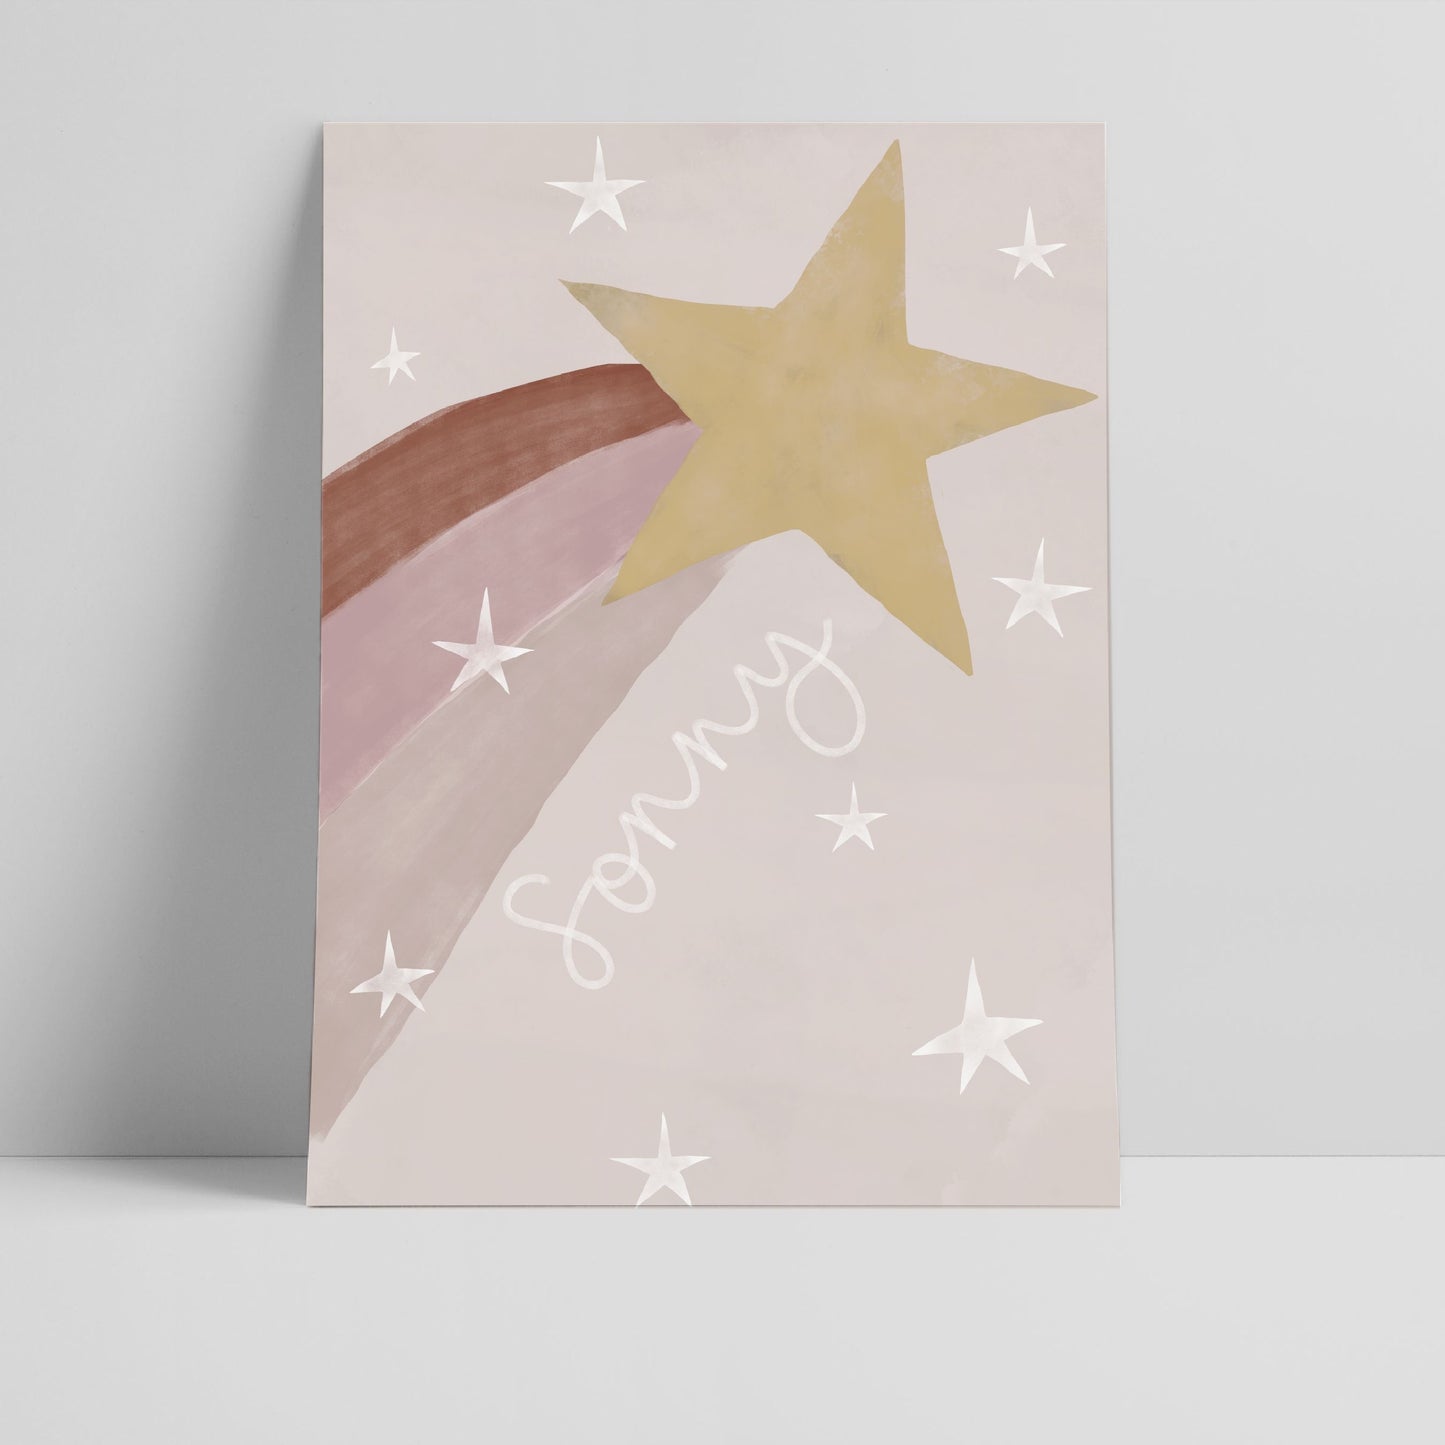 Shooting Star Print - Can be personalised